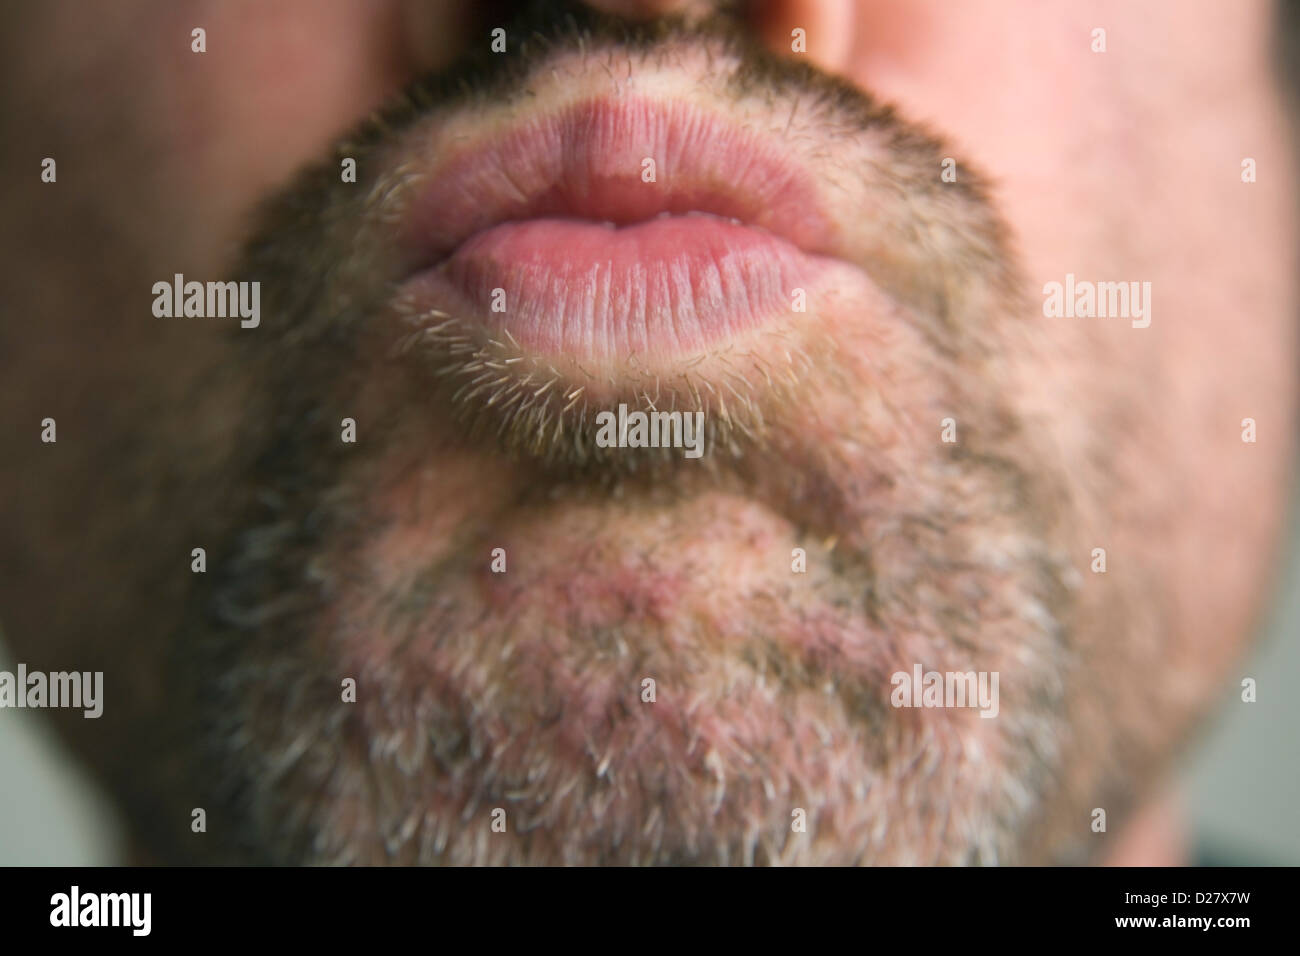 Scruffy Faced Man Making Face, Close-up of Chin Stock Photo